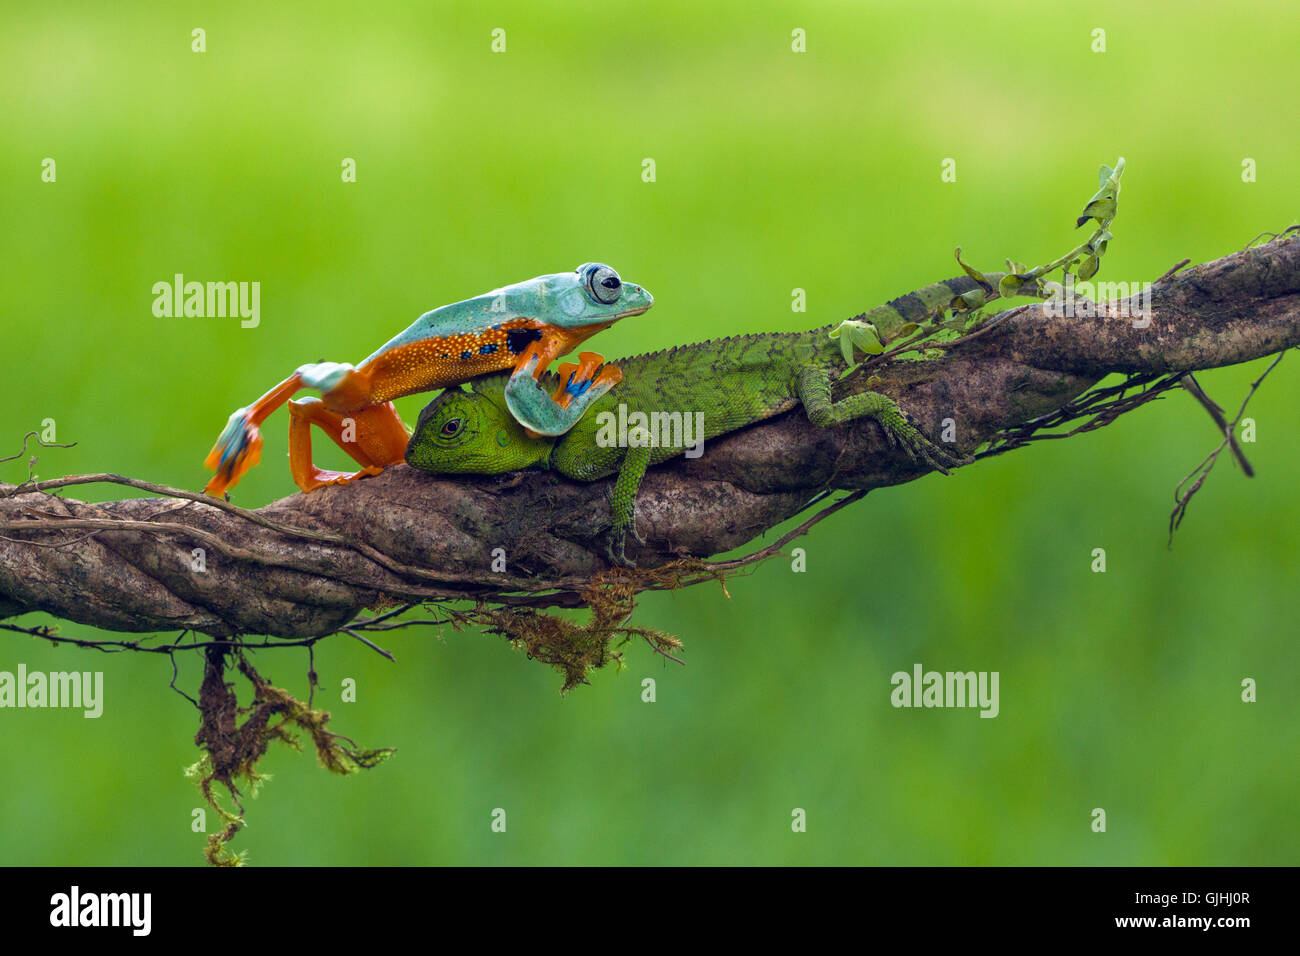 Frog crawling over a lizard on branch, Indonesia Stock Photo